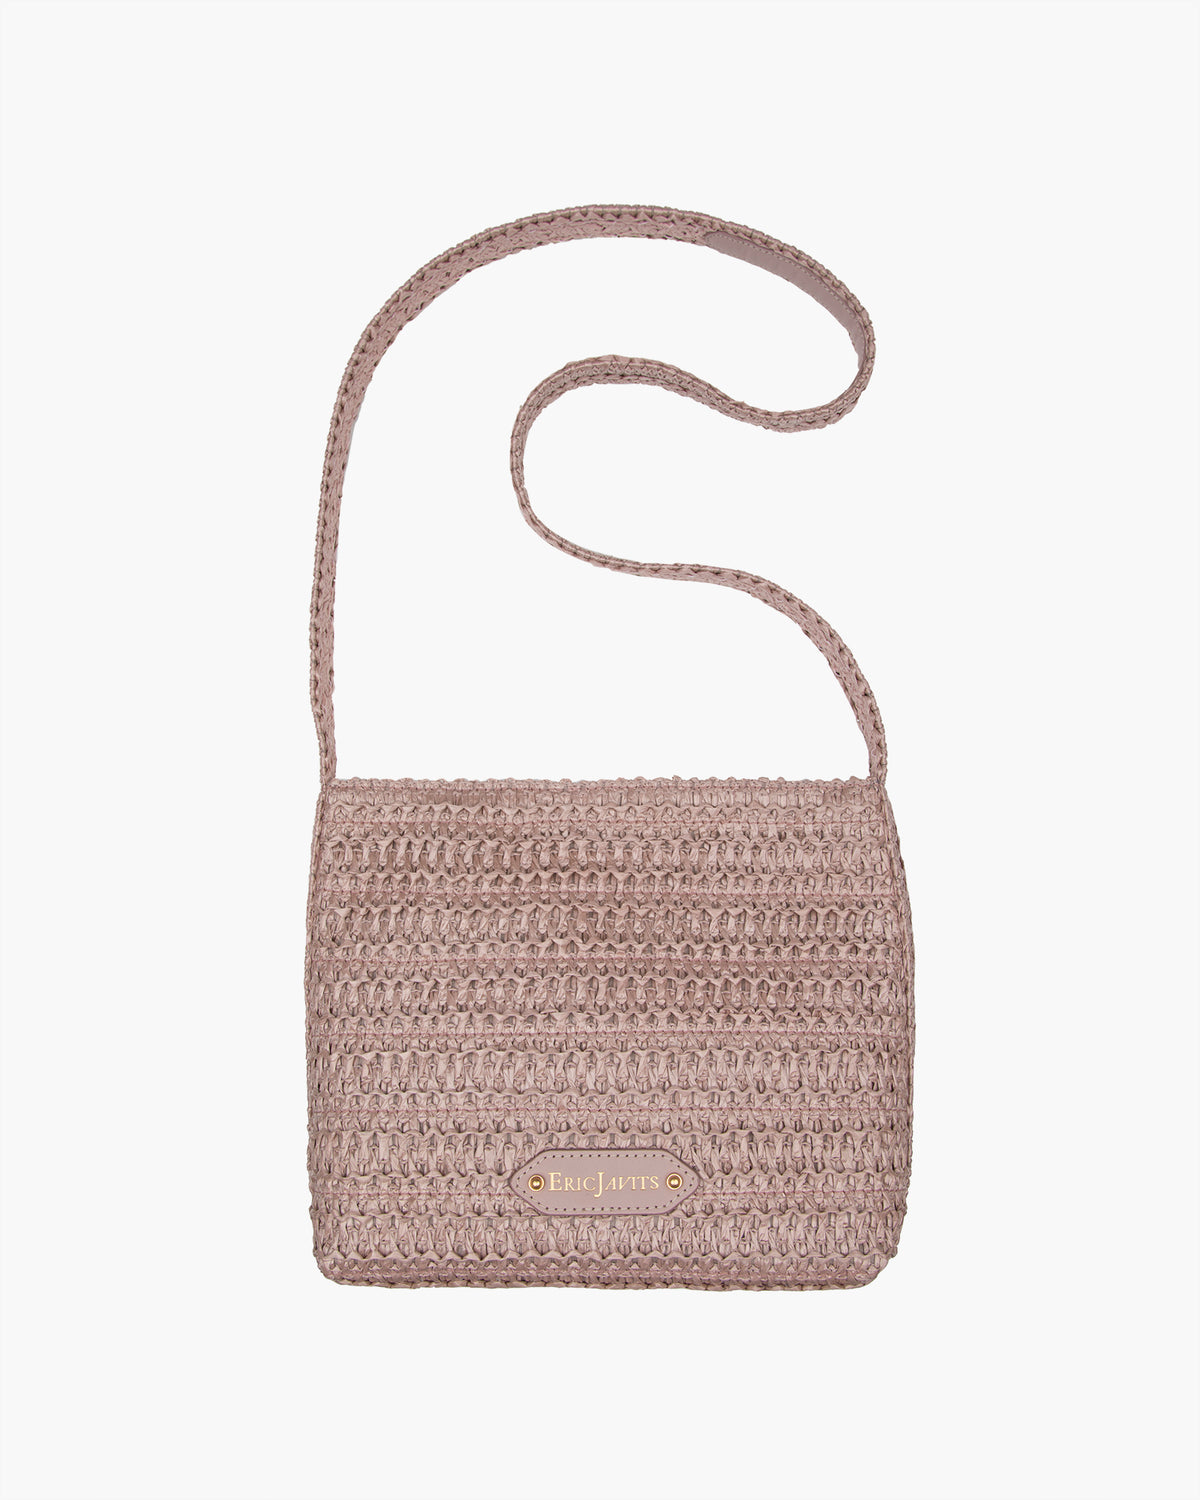 Designer Straw Beach Bags for Women for Sale, Eric Javits